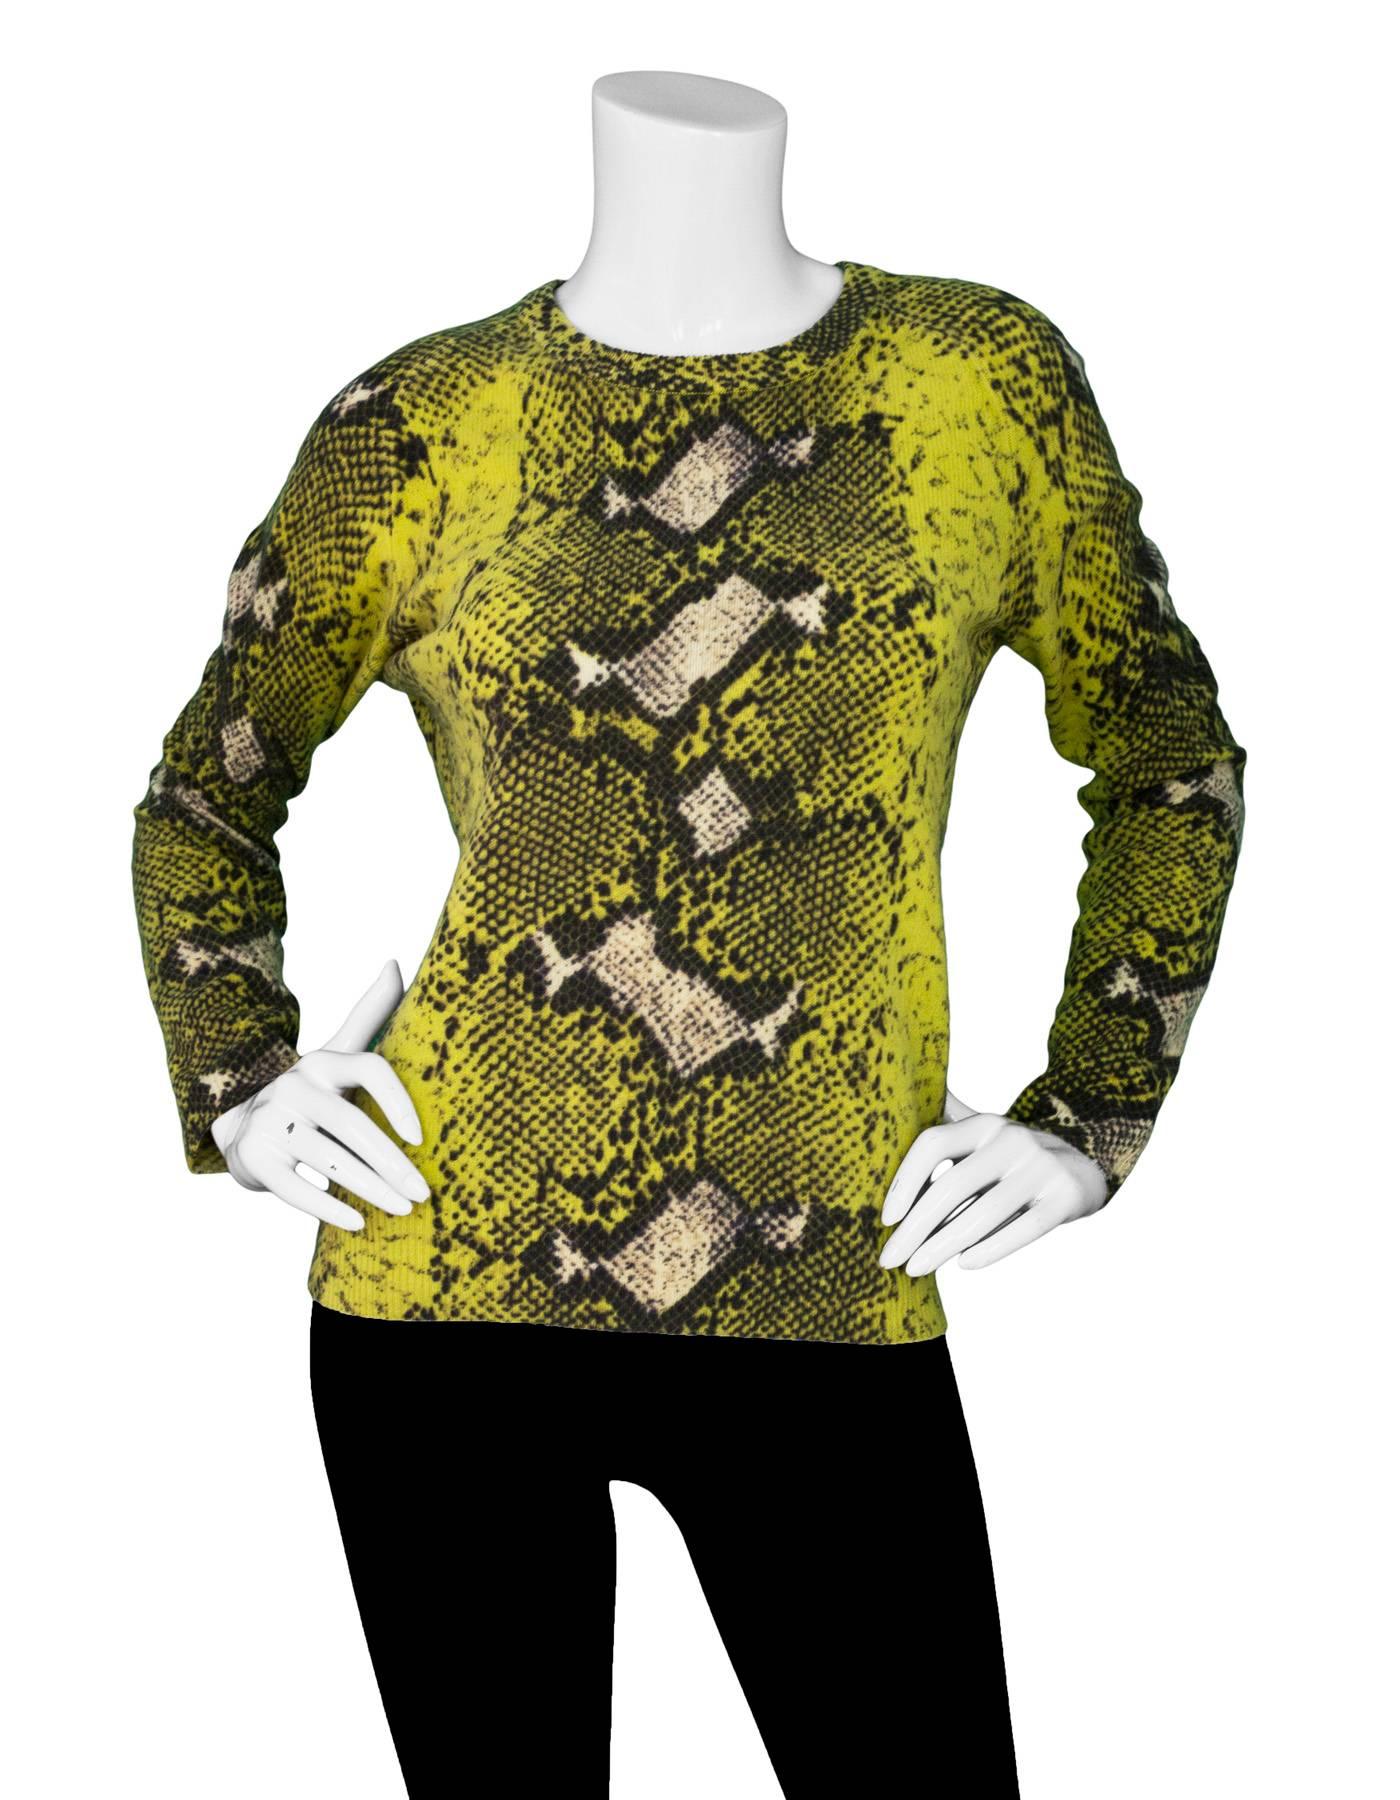 Equipment Yellow Cashmere Snake Print Sweater Sz XS

Made In: China
Color: Yellow
Composition: 100% cashmere
Lining: None
Closure/Opening: Pull over
Overall Condition: Excellent pre-owned condition, light pilling
Marked Size: XS
Bust: 36